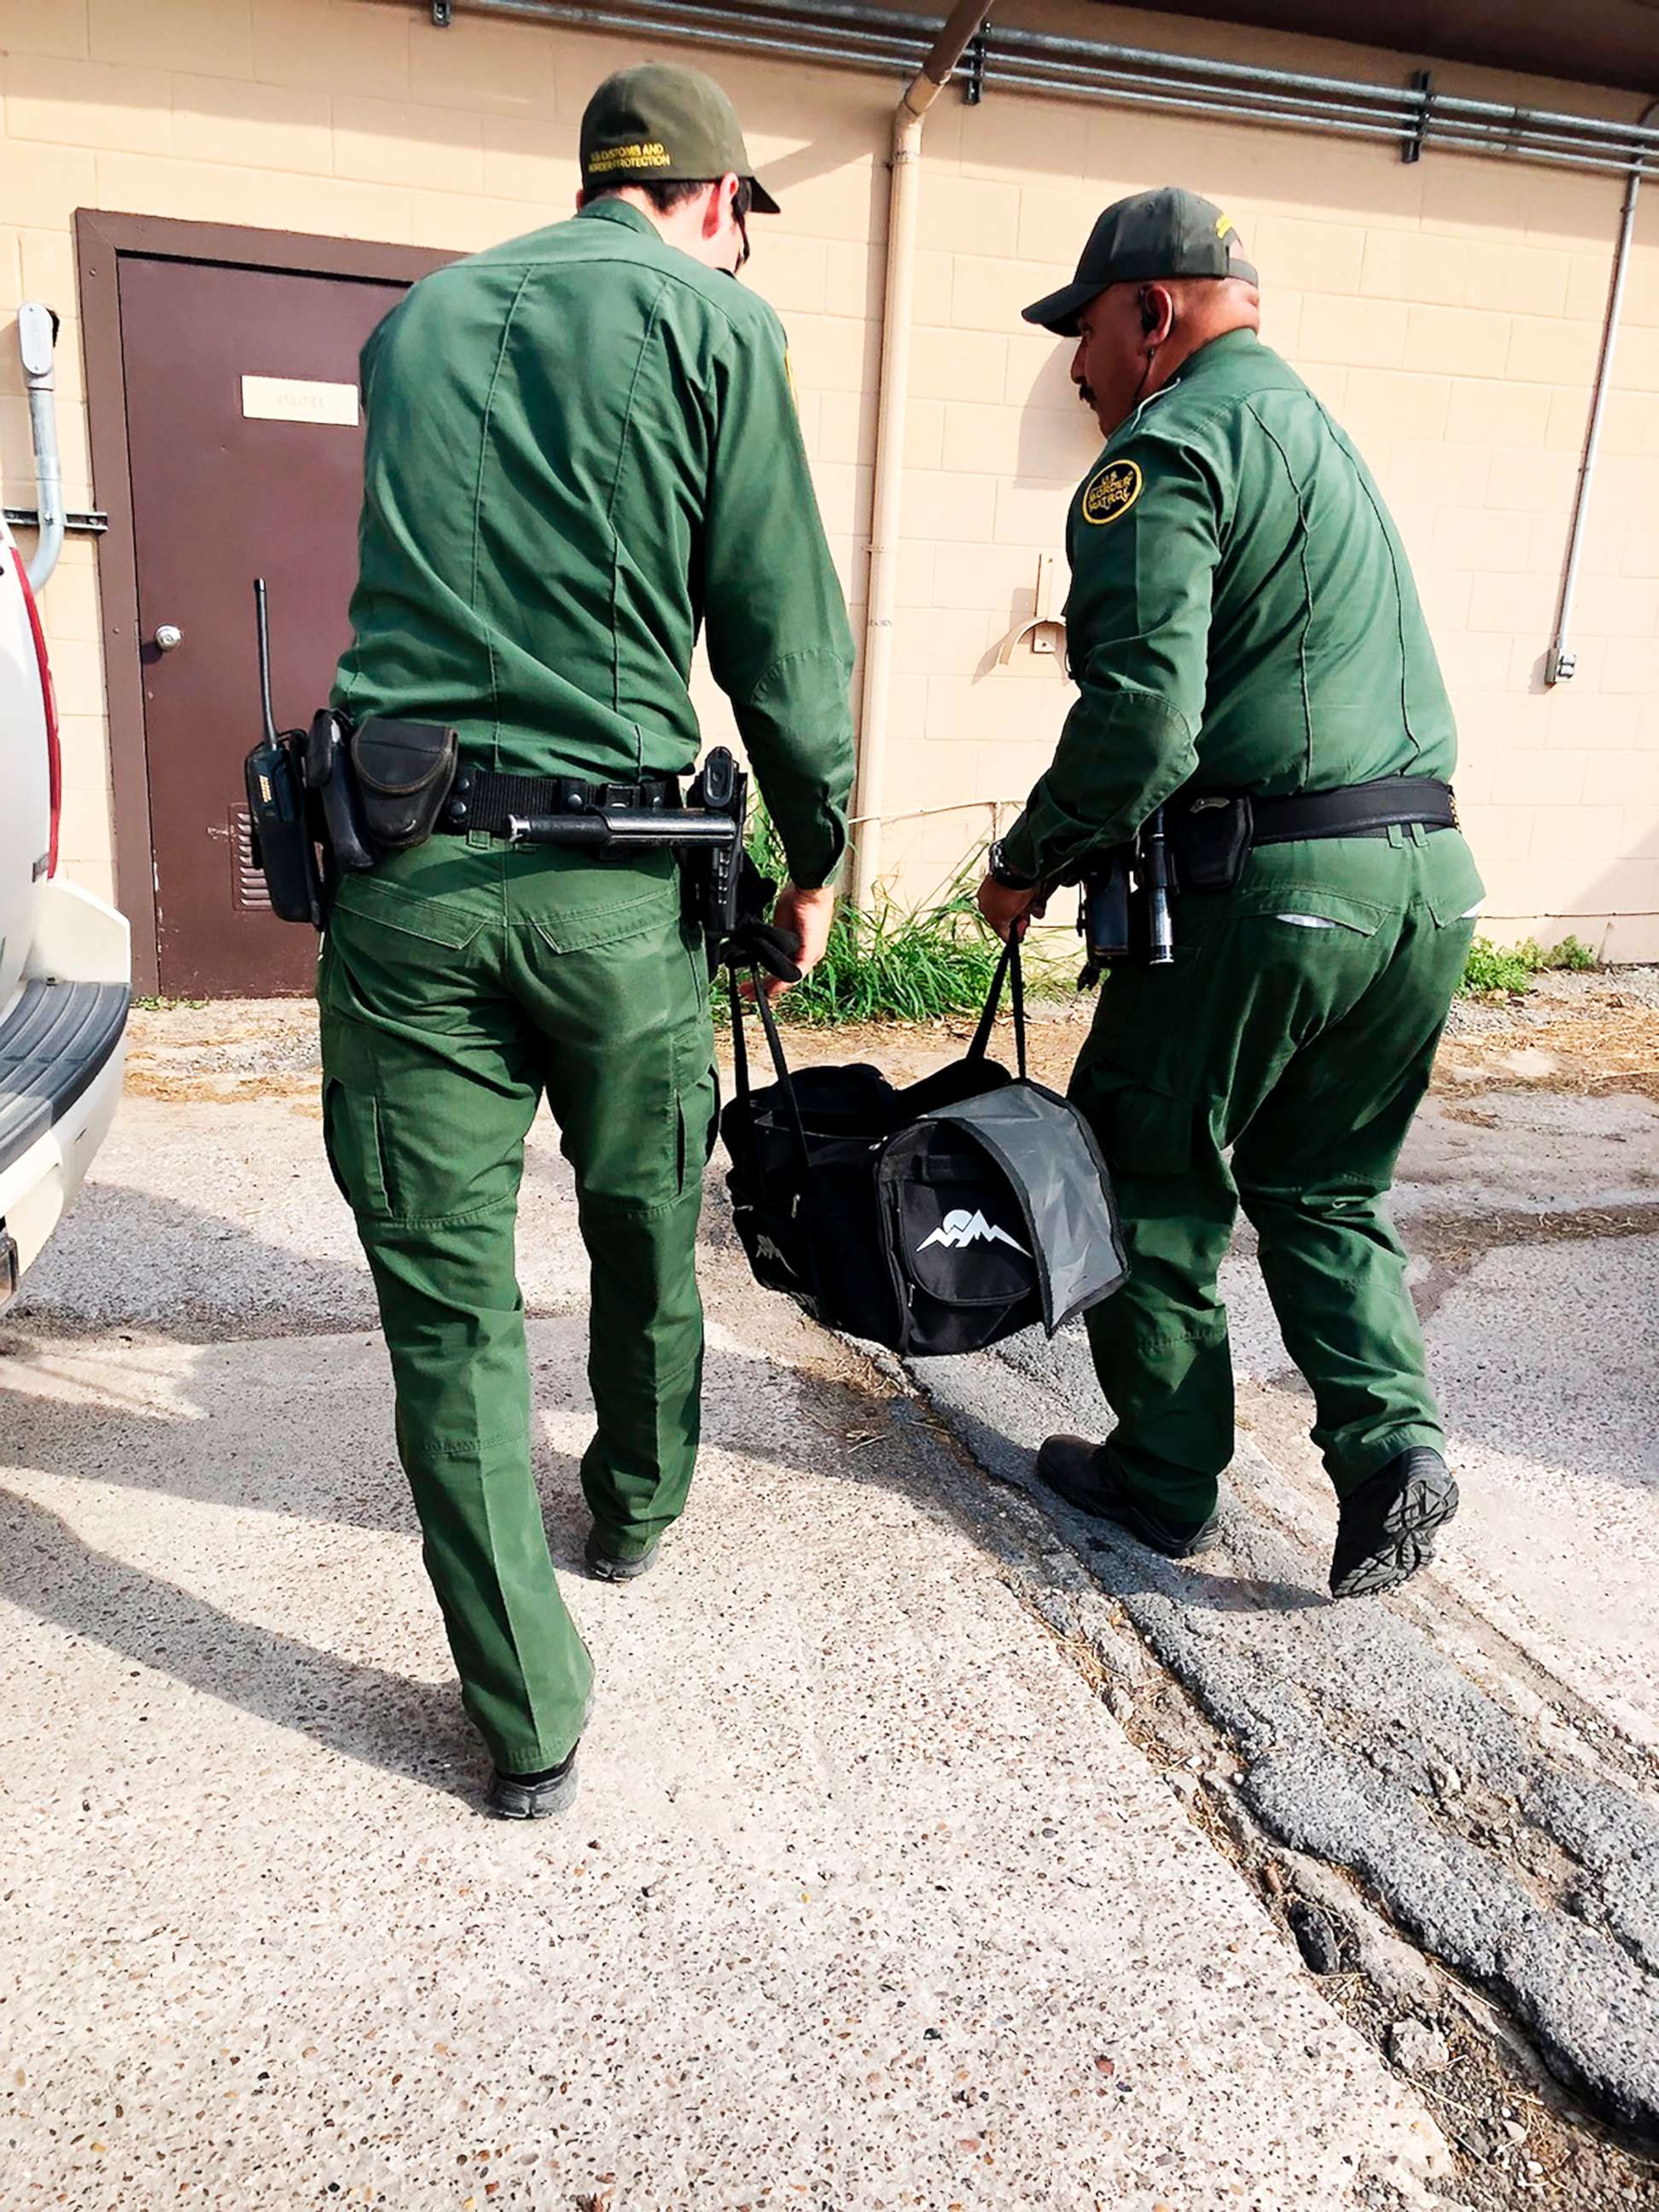 PHOTO: U.S Customs and Border Protection agents carrying a male tiger in a duffle bag that was seized at the border near Brownsville, Texas, into the the Gladys Porter Zoo in Brownsville, April 30, 2018.